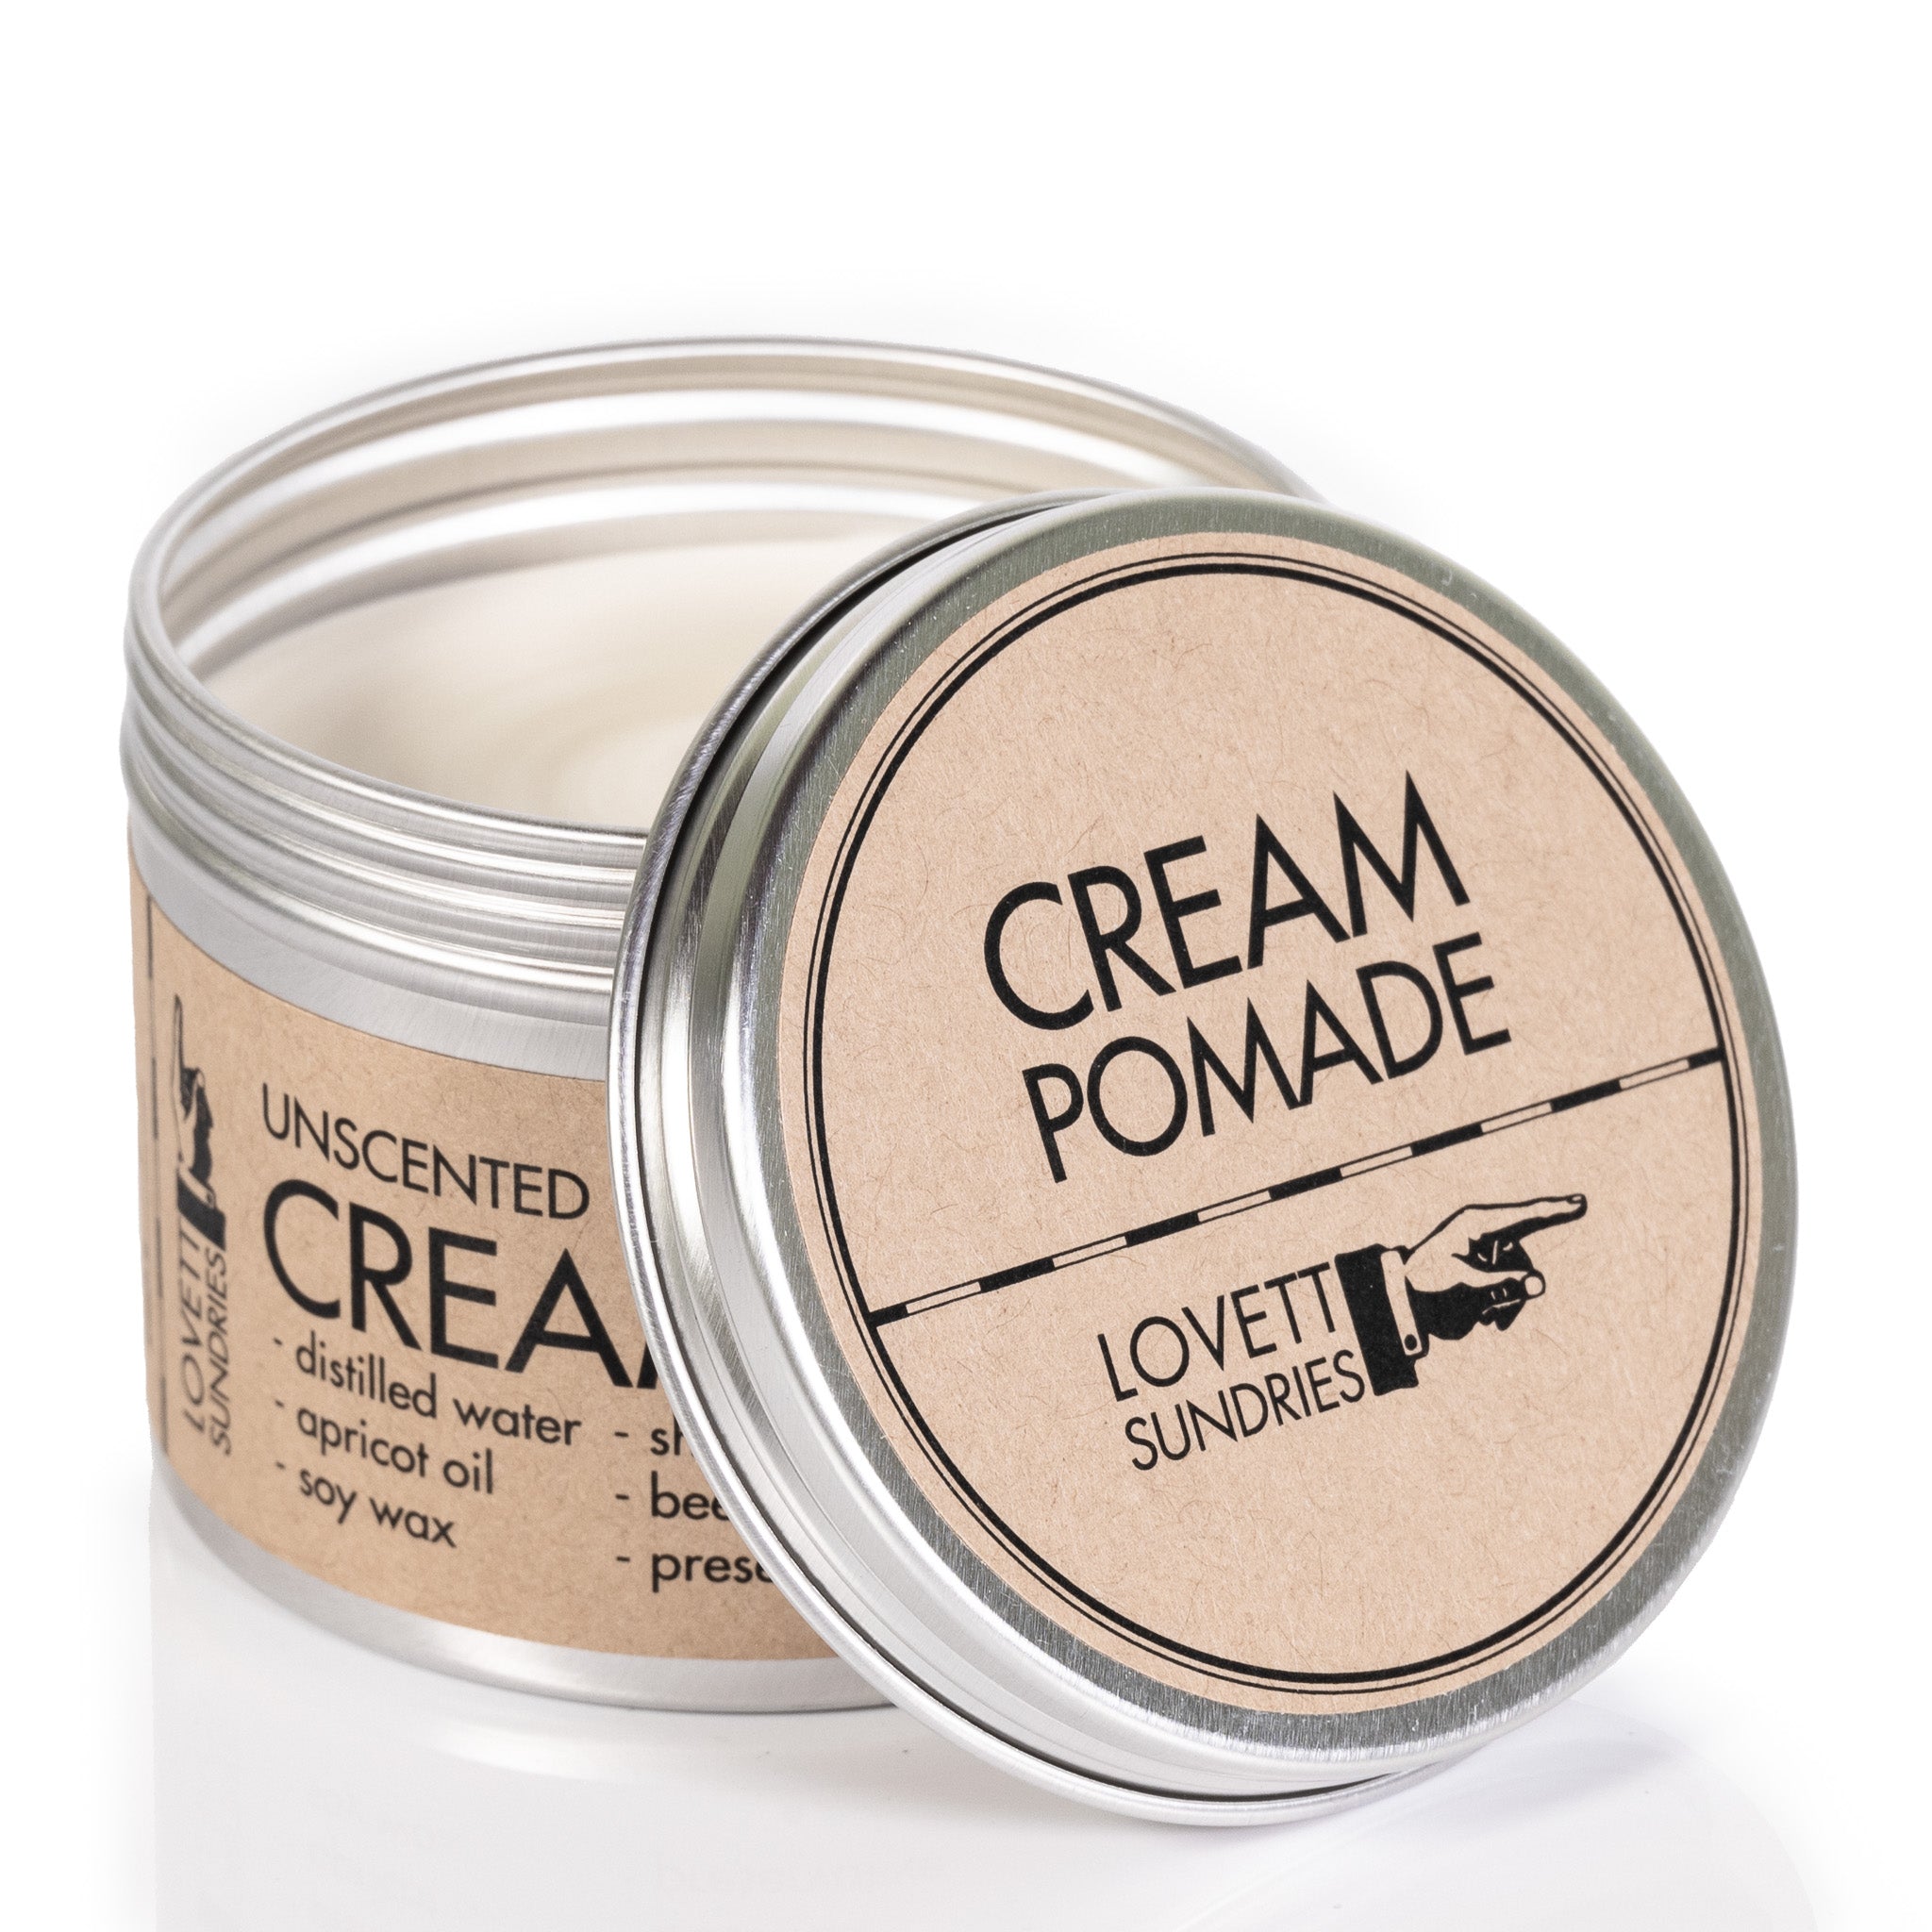 Open tin of unscented cream pomade.